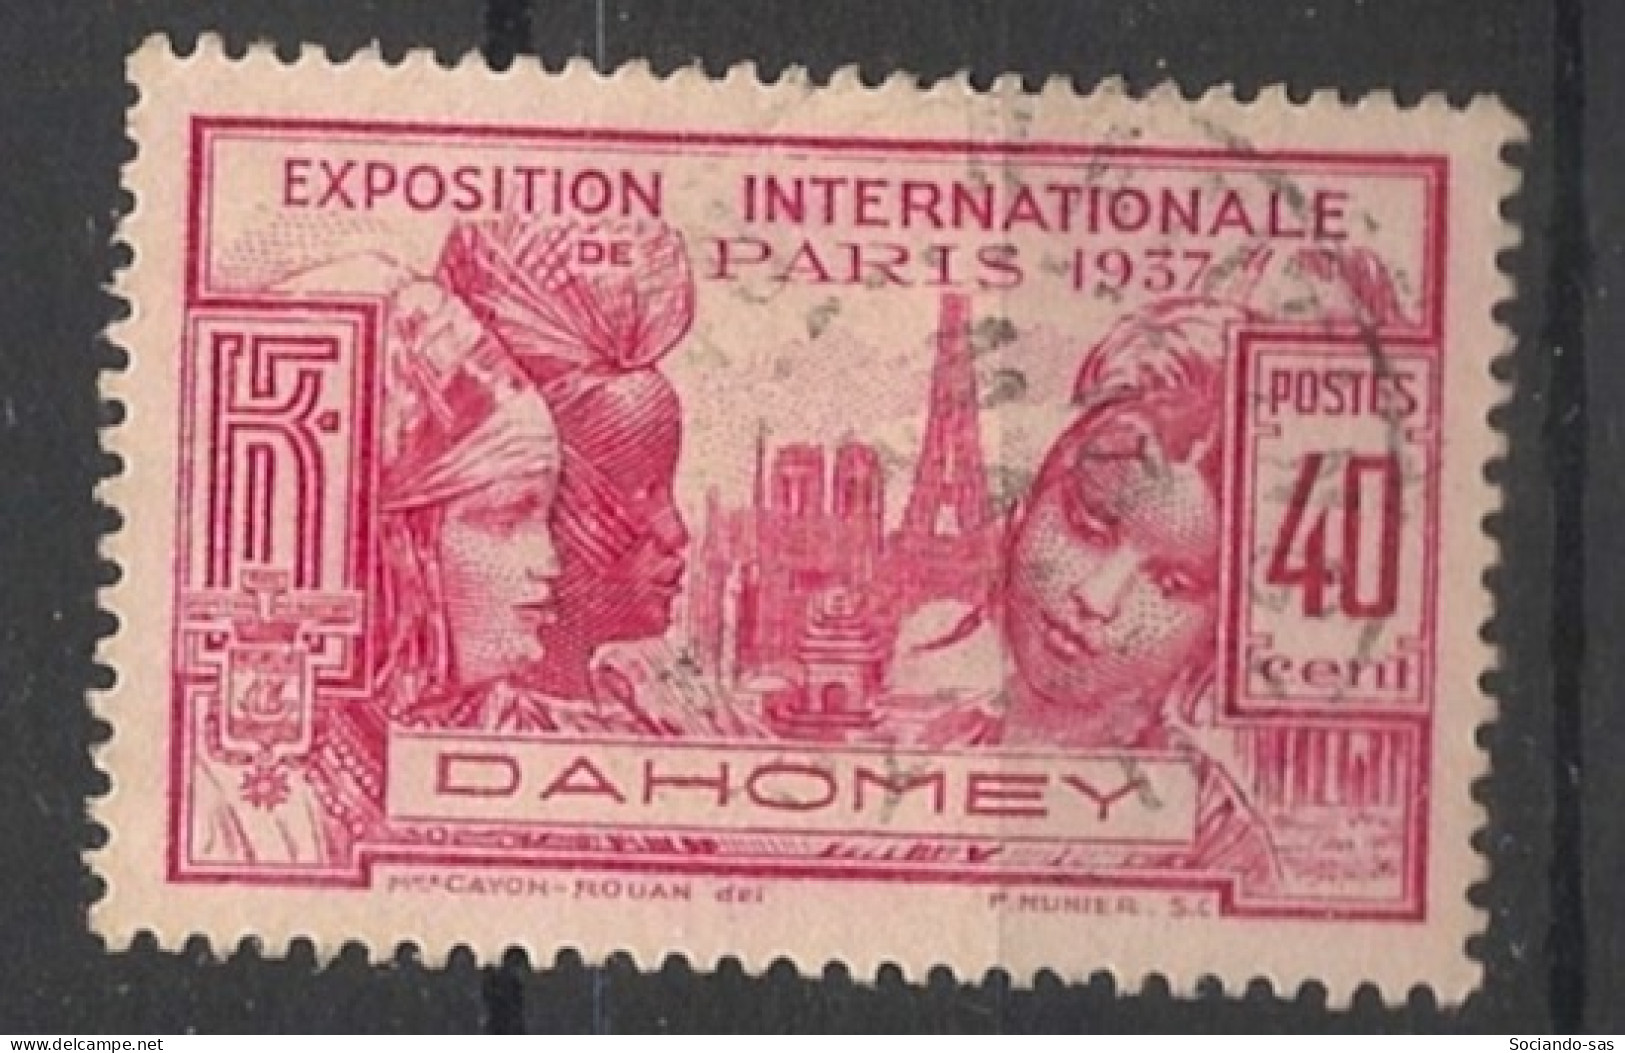 DAHOMEY - 1937 - N°YT. 105 - Exposition Internationale 40c Rose - Oblitéré / Used - Used Stamps